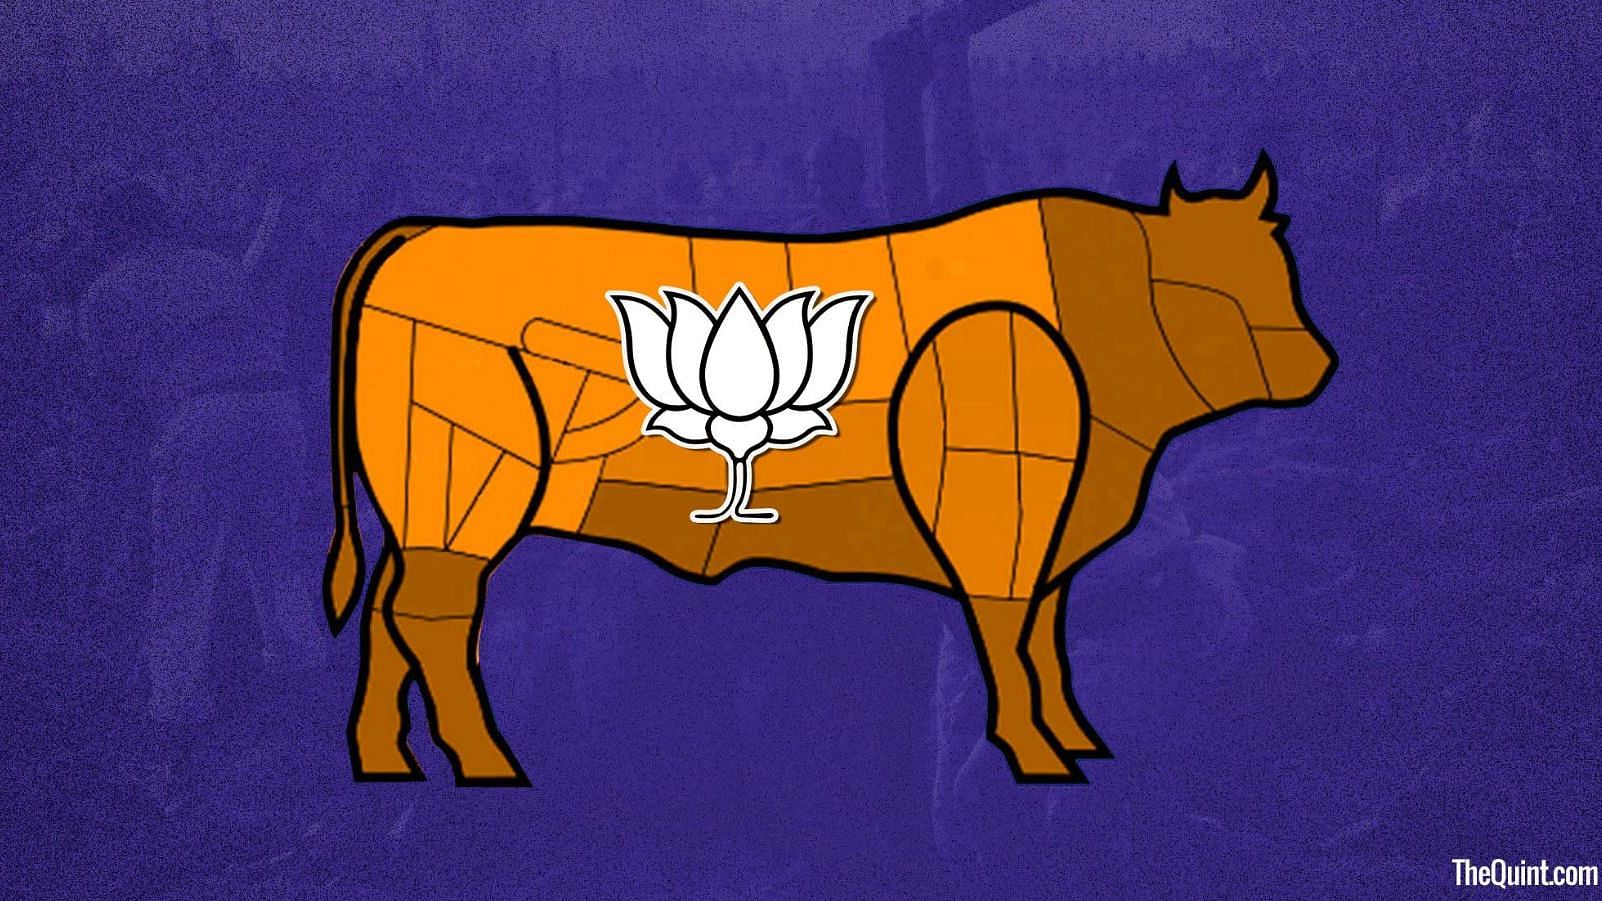 The BJP intends to create a portal where one can register if they want a cow.